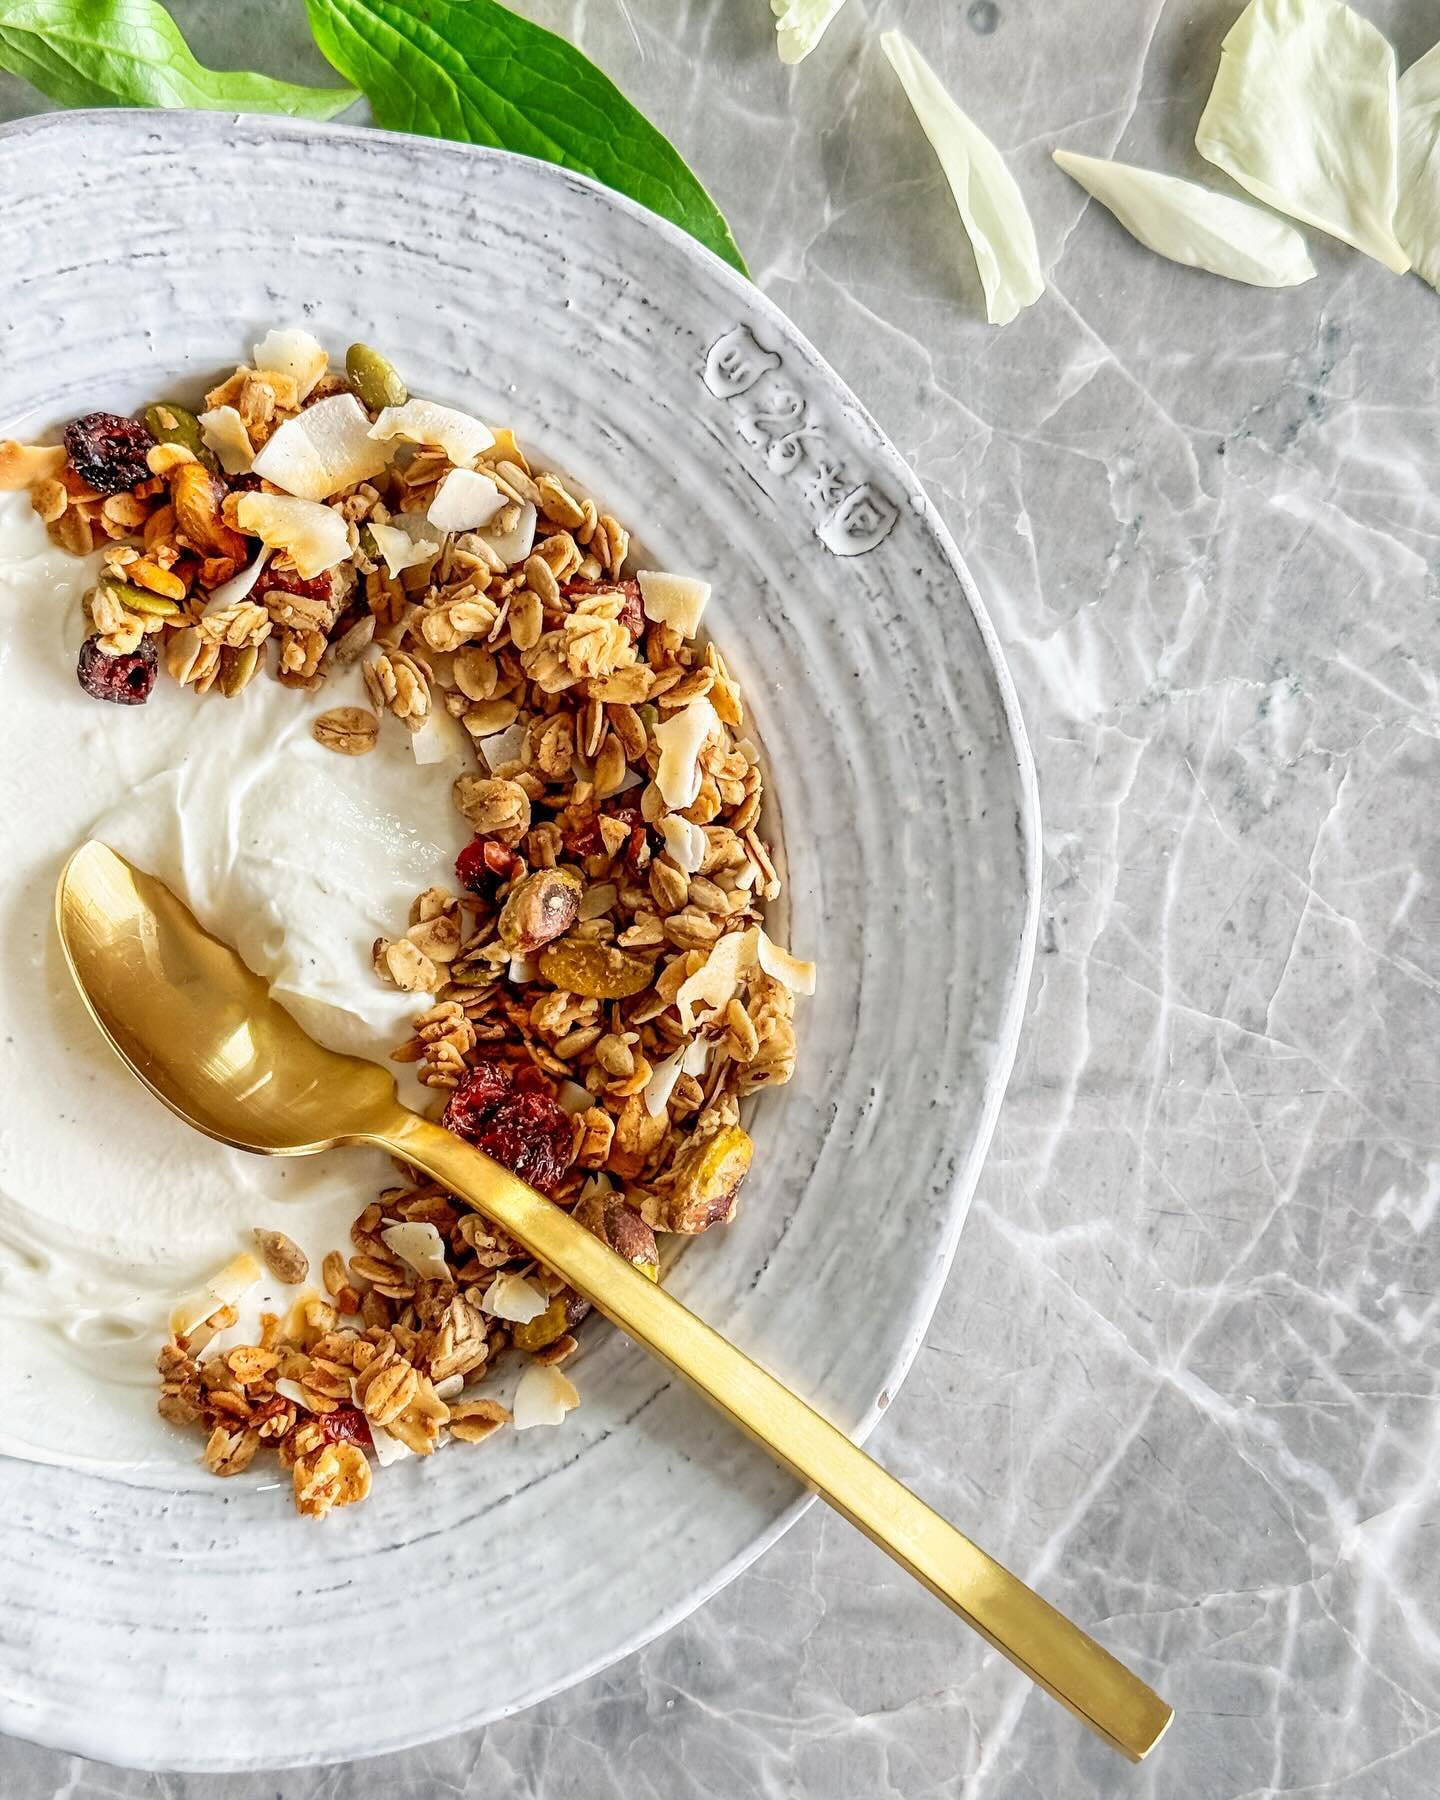 Start your day with a quick and easy delicious and nutritious breakfast.

-&gt;&gt;Greek yogurt is packed with protein, calcium, and probiotics, making it a healthy choice
-&gt;&gt;Granola adds a satisfying crunch and is a great source of fiber and h